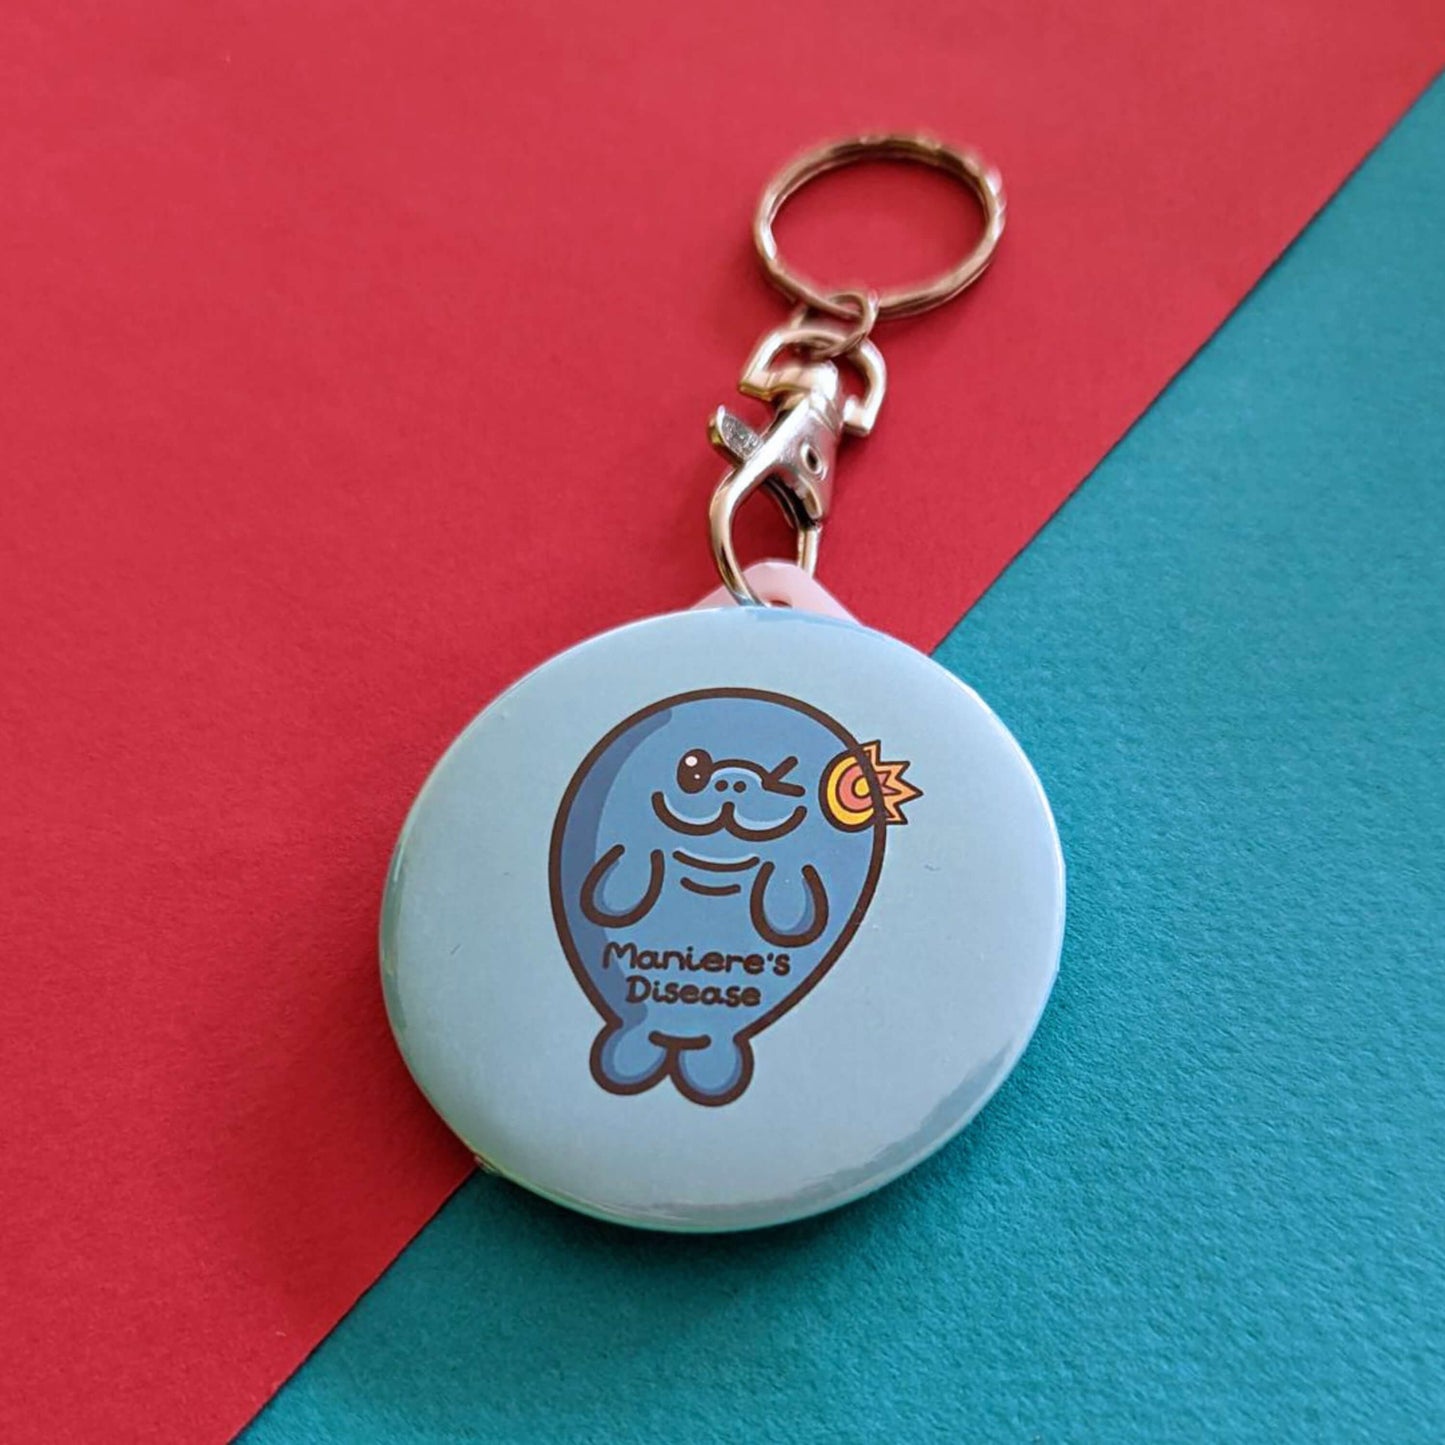 The Maniere's Disease Manatee Keyring - Ménière's Disease on a red and blue background. The pastel blue circular plastic keychain with silver lobster clip features a winking manatee with a yellow and red inflamed ear and black text across its body reading 'maniere's disease'. The hand drawn design is raising awareness for Ménière's Disease and vertigo.